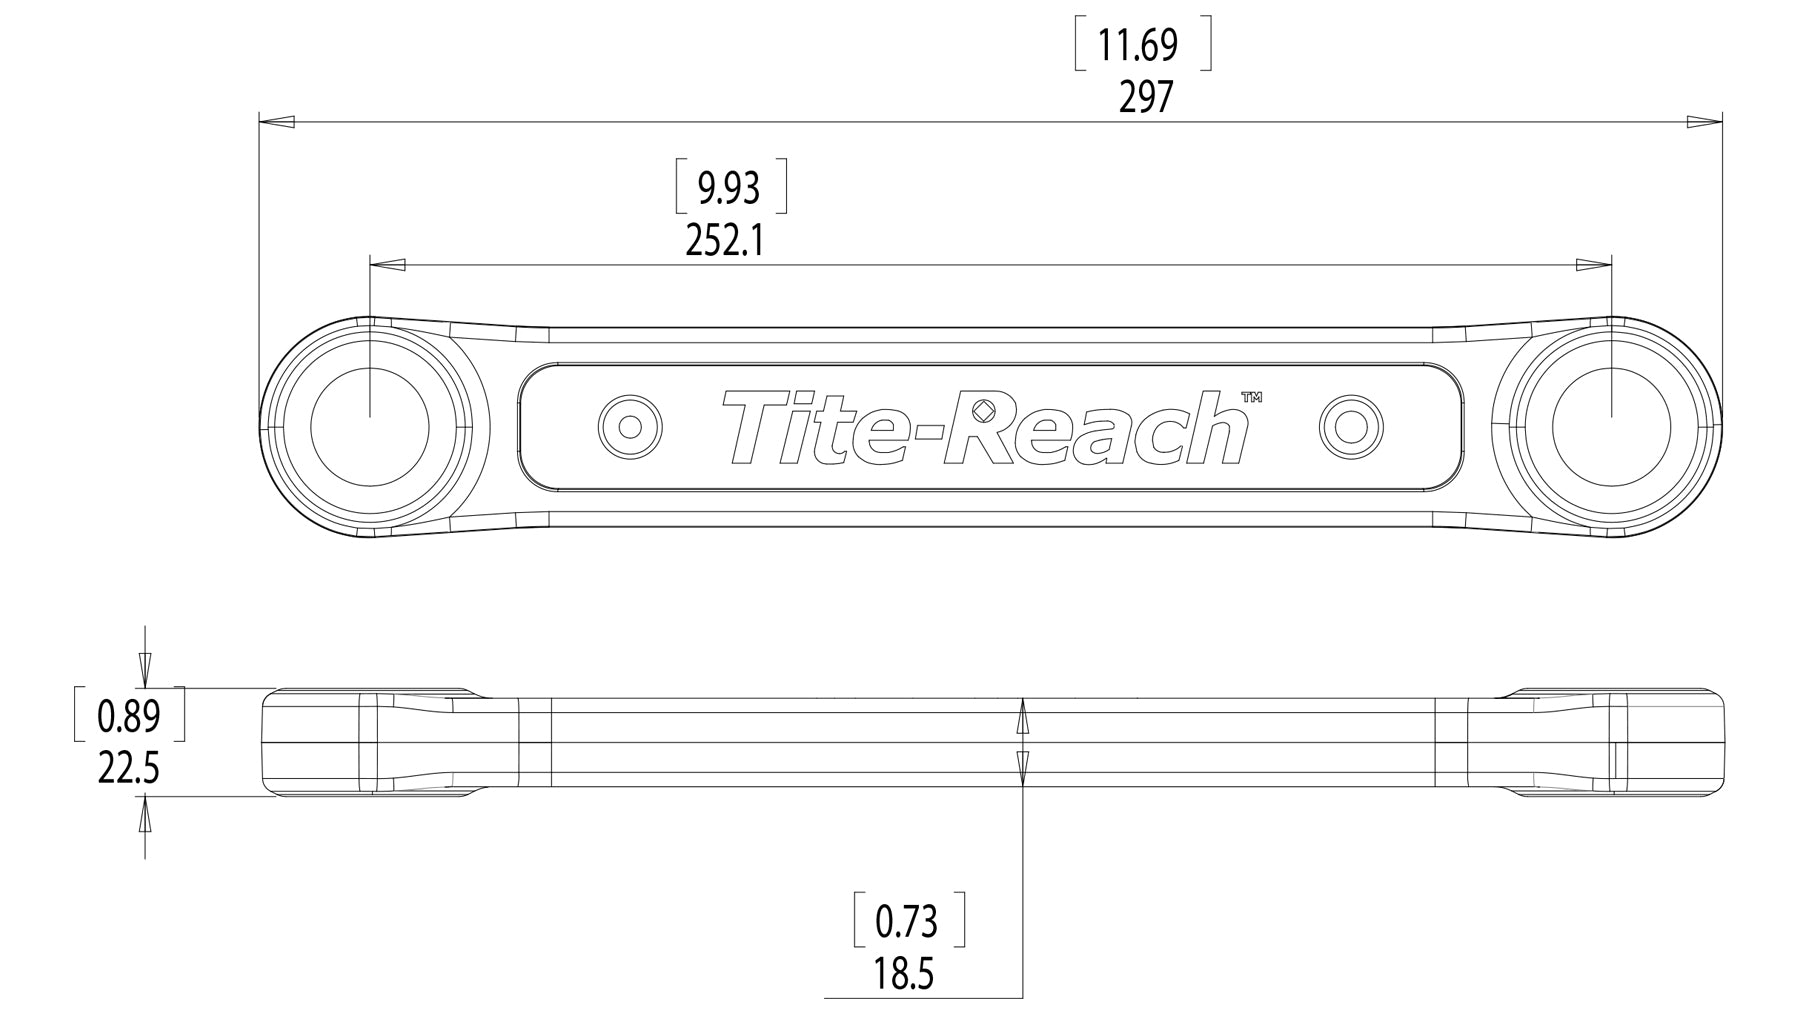 Tite-Reach Extension Clamp Tool 